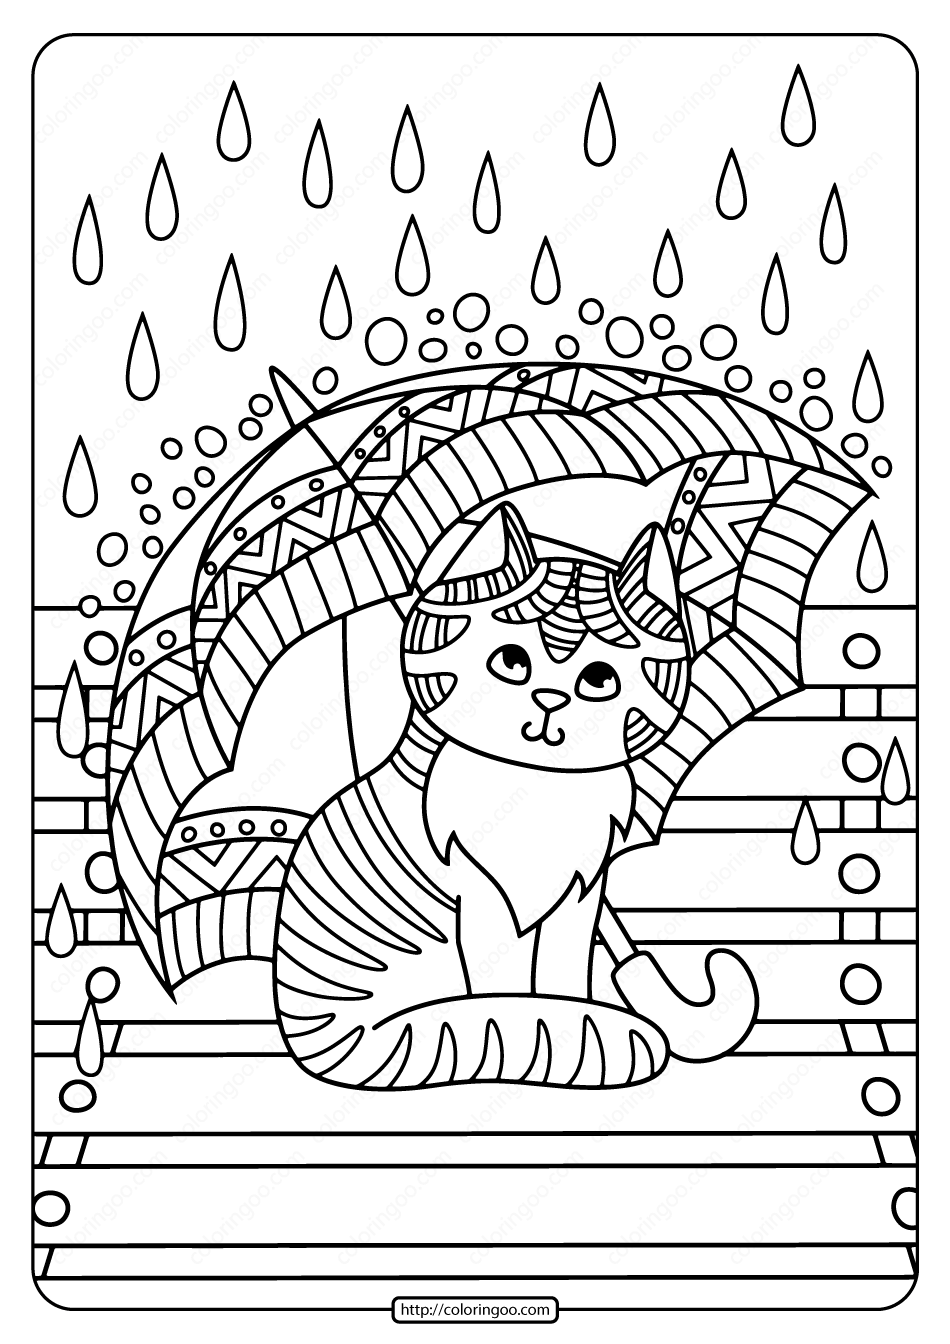 kitten with umbrella in the rain coloring page